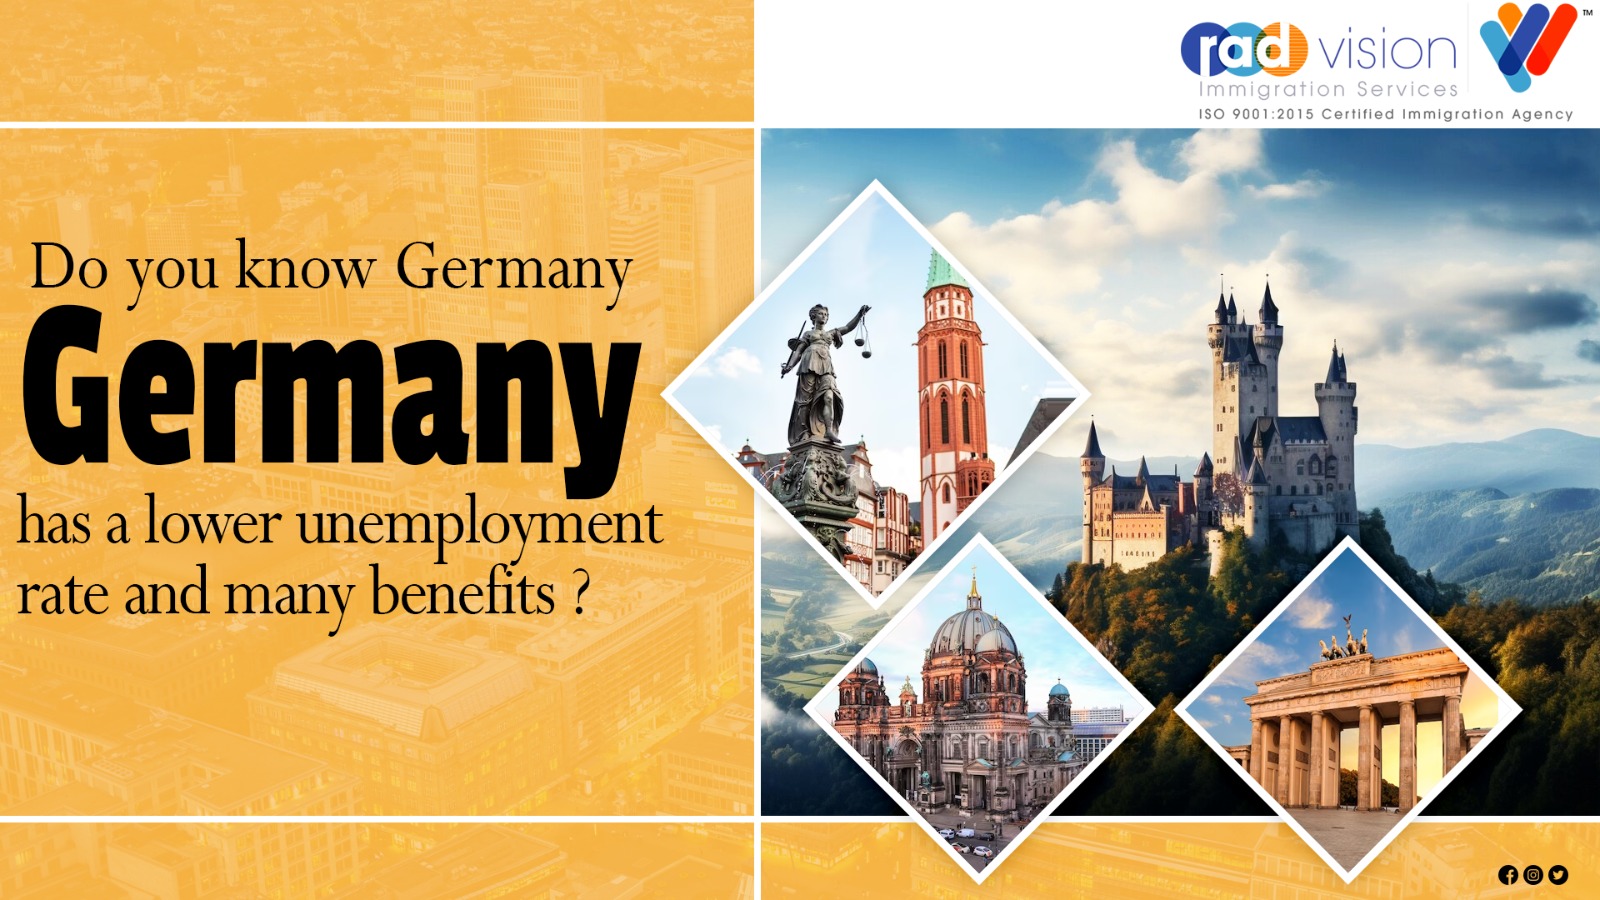 Do you know Germany has a lower unemployment rate and many benefits